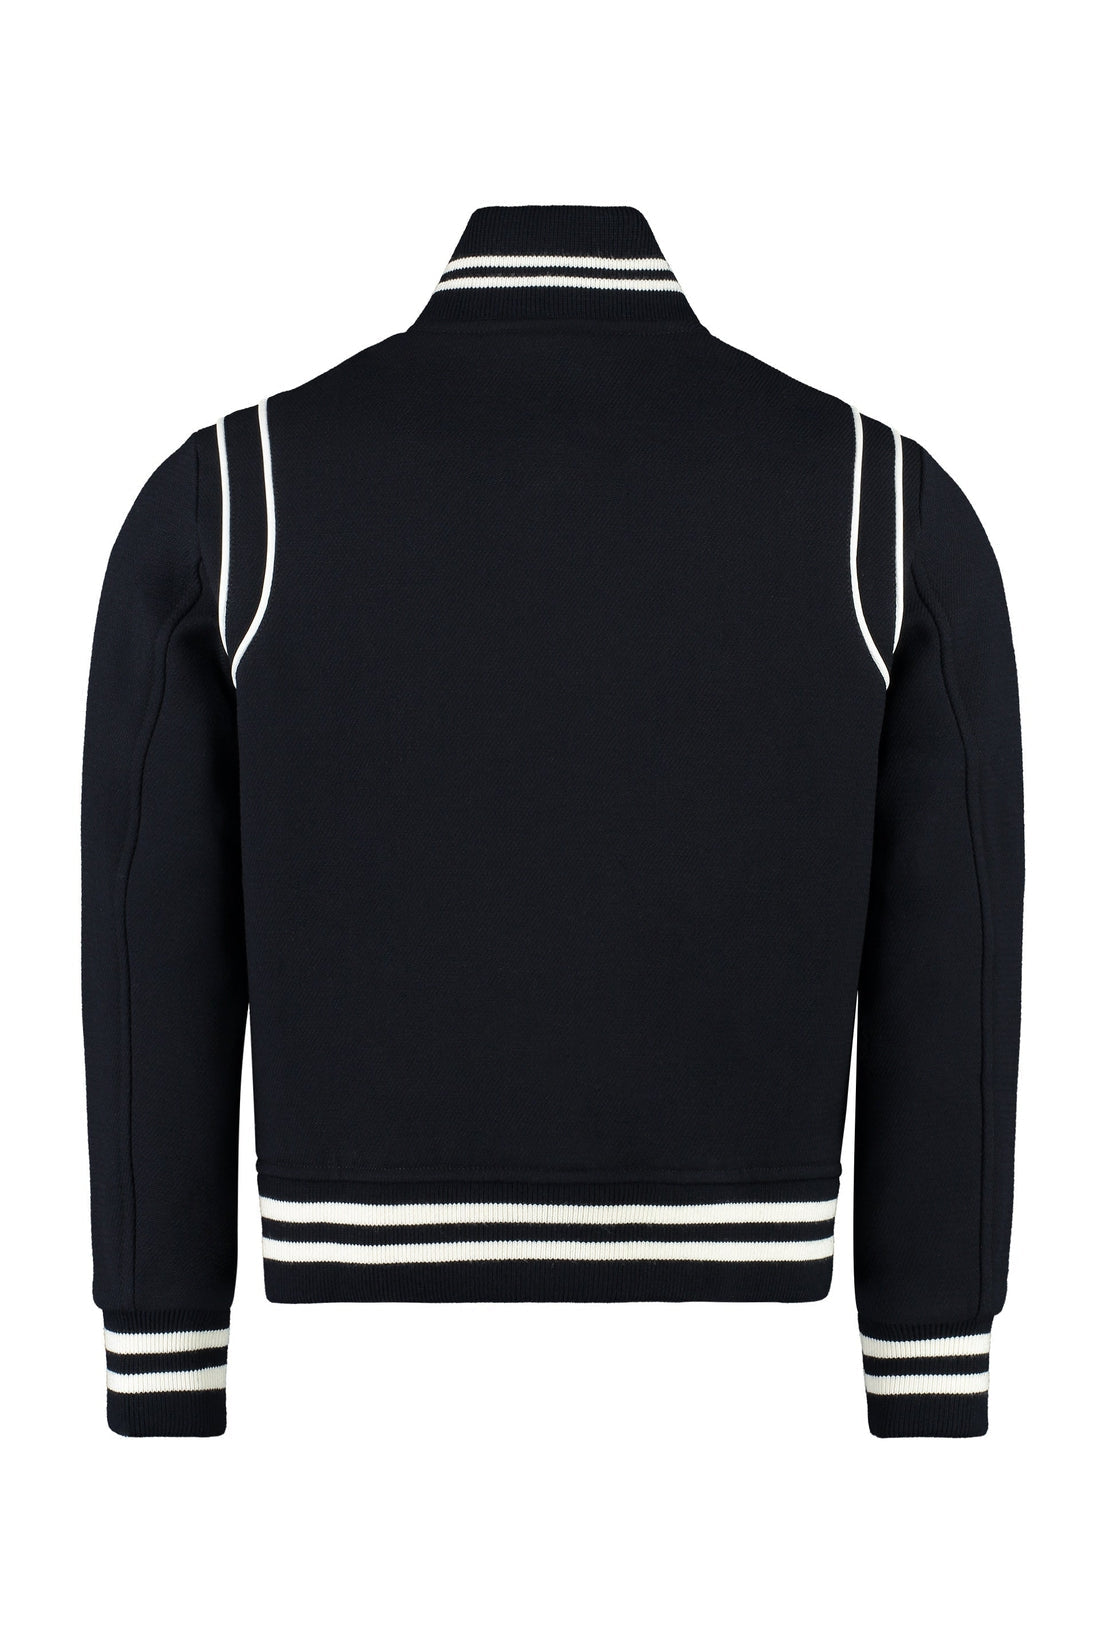 Sporty & Rich-OUTLET-SALE-Embroidered wool bomber jacket-ARCHIVIST